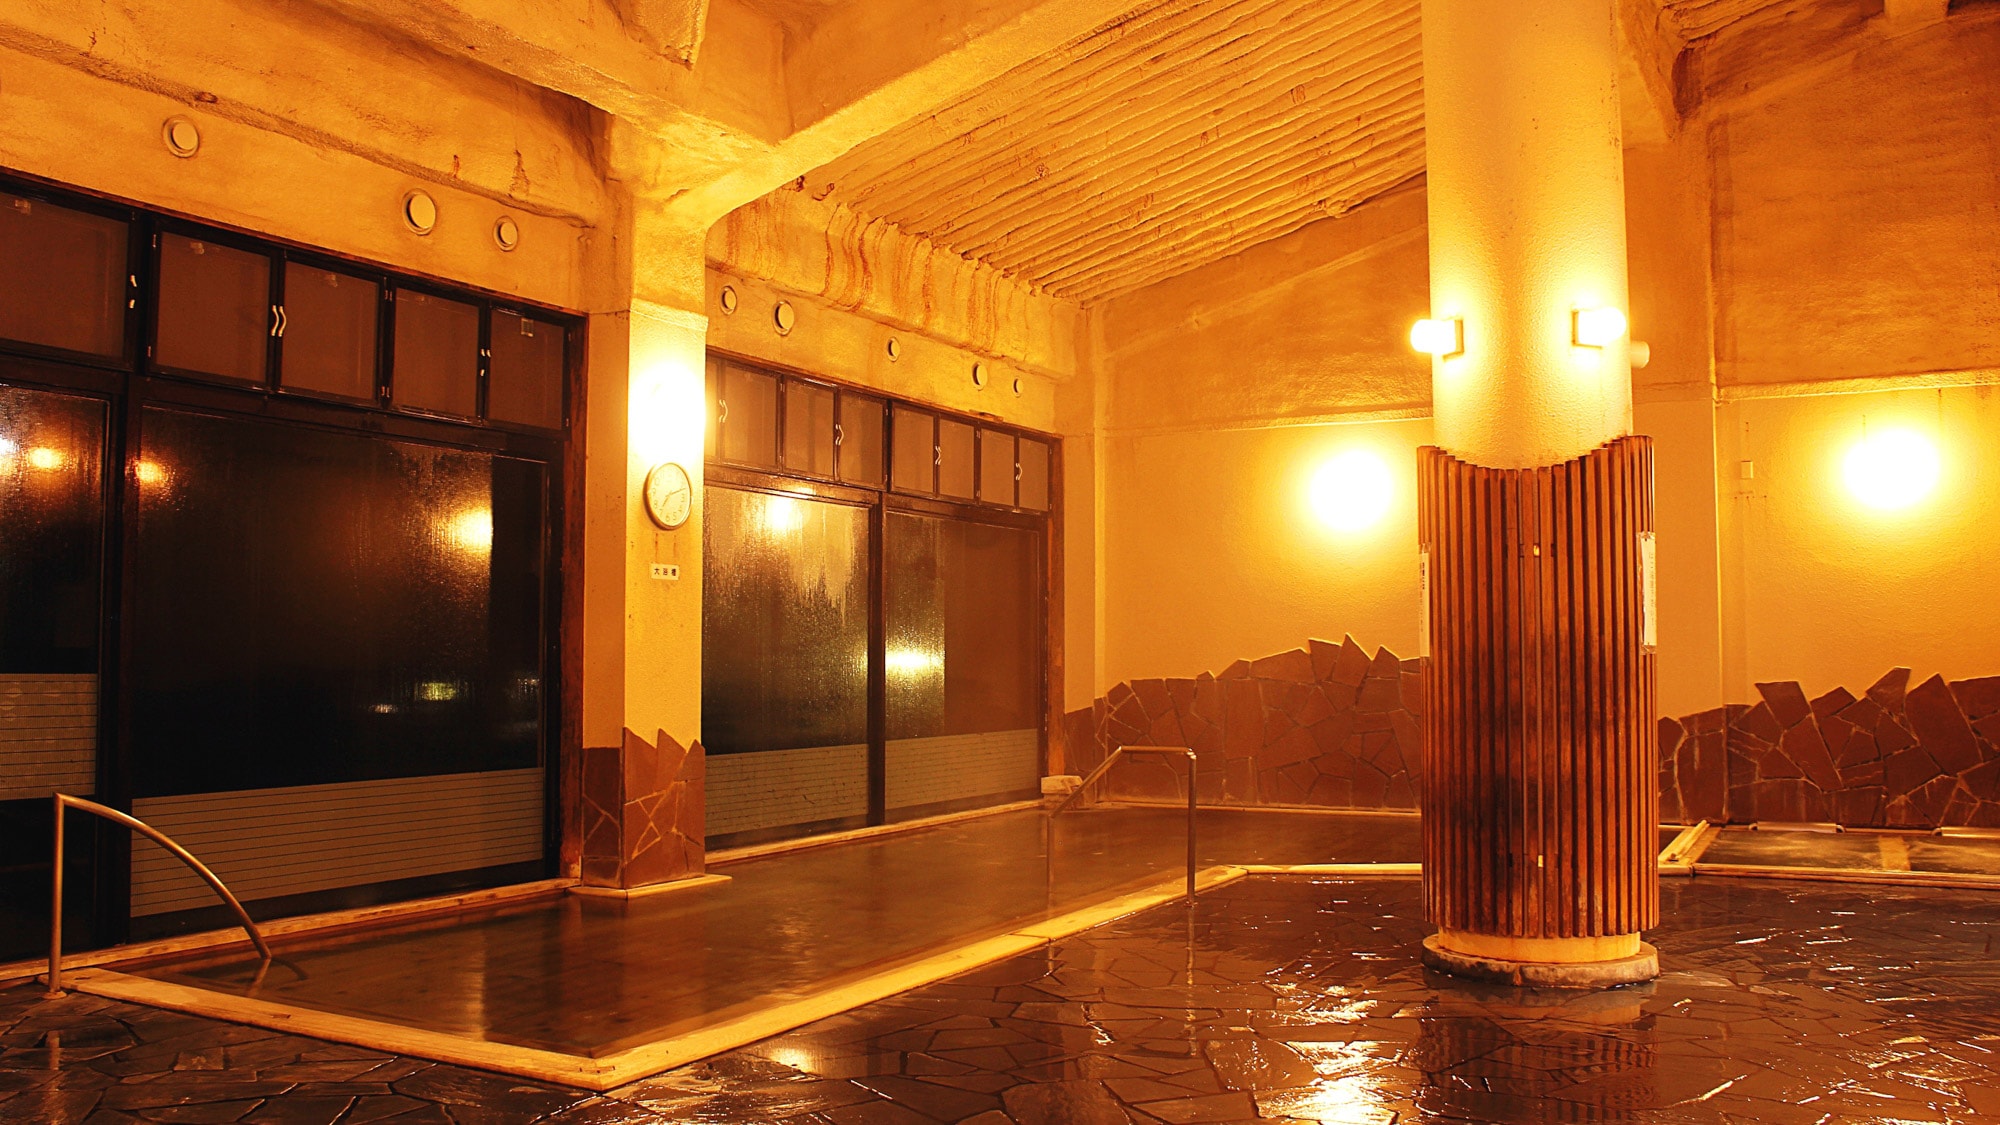 * [Onsen] The hot springs of this hotel, which are made entirely of Hiba, are famous as "salty hot springs".